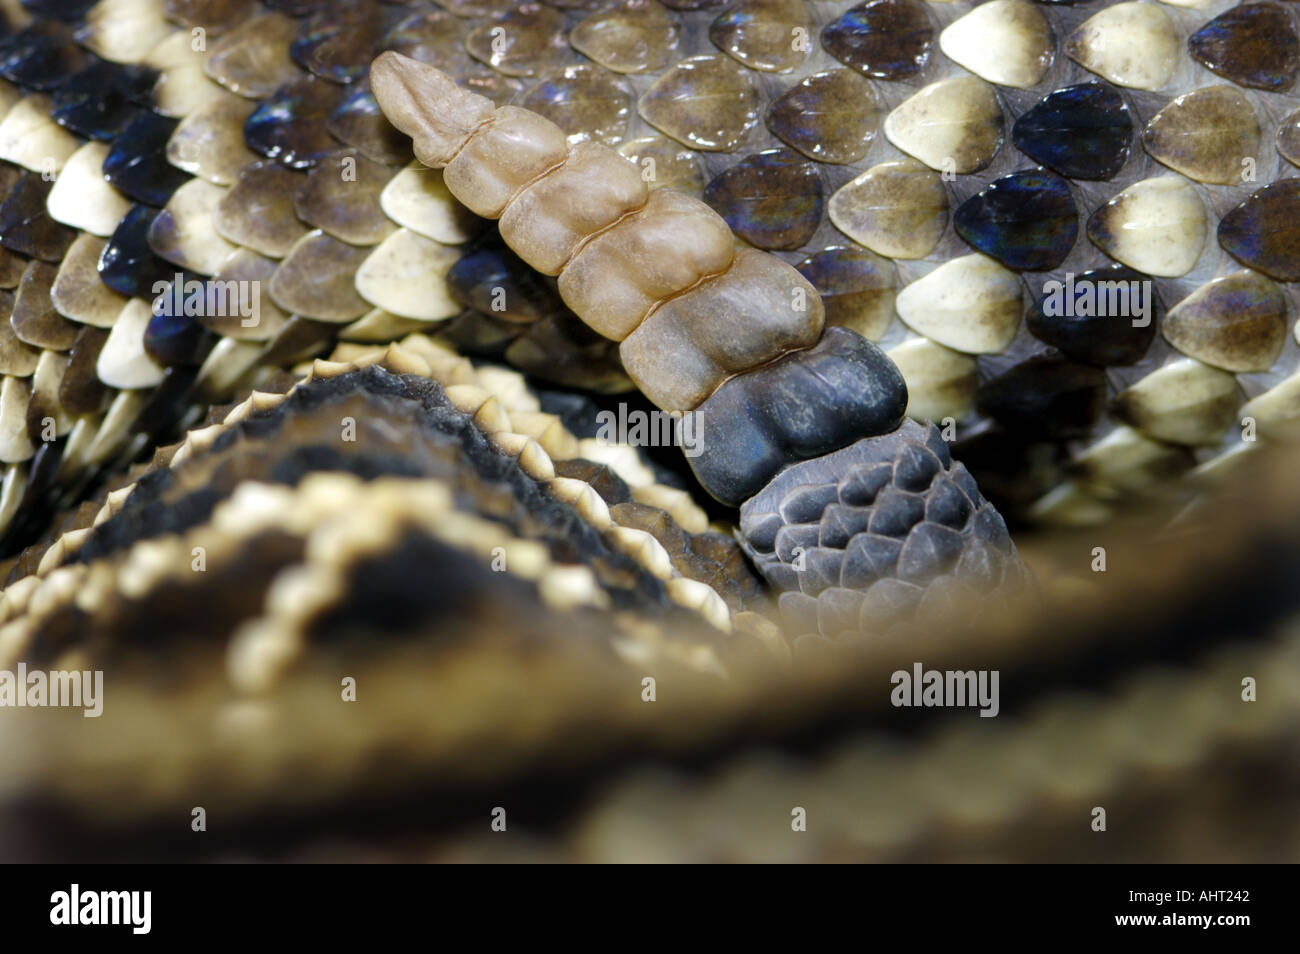 the rattle of a rattle snake RATTLESNAKE Klapperschlange Rassel CROTALUS DURISSUS Stock Photo